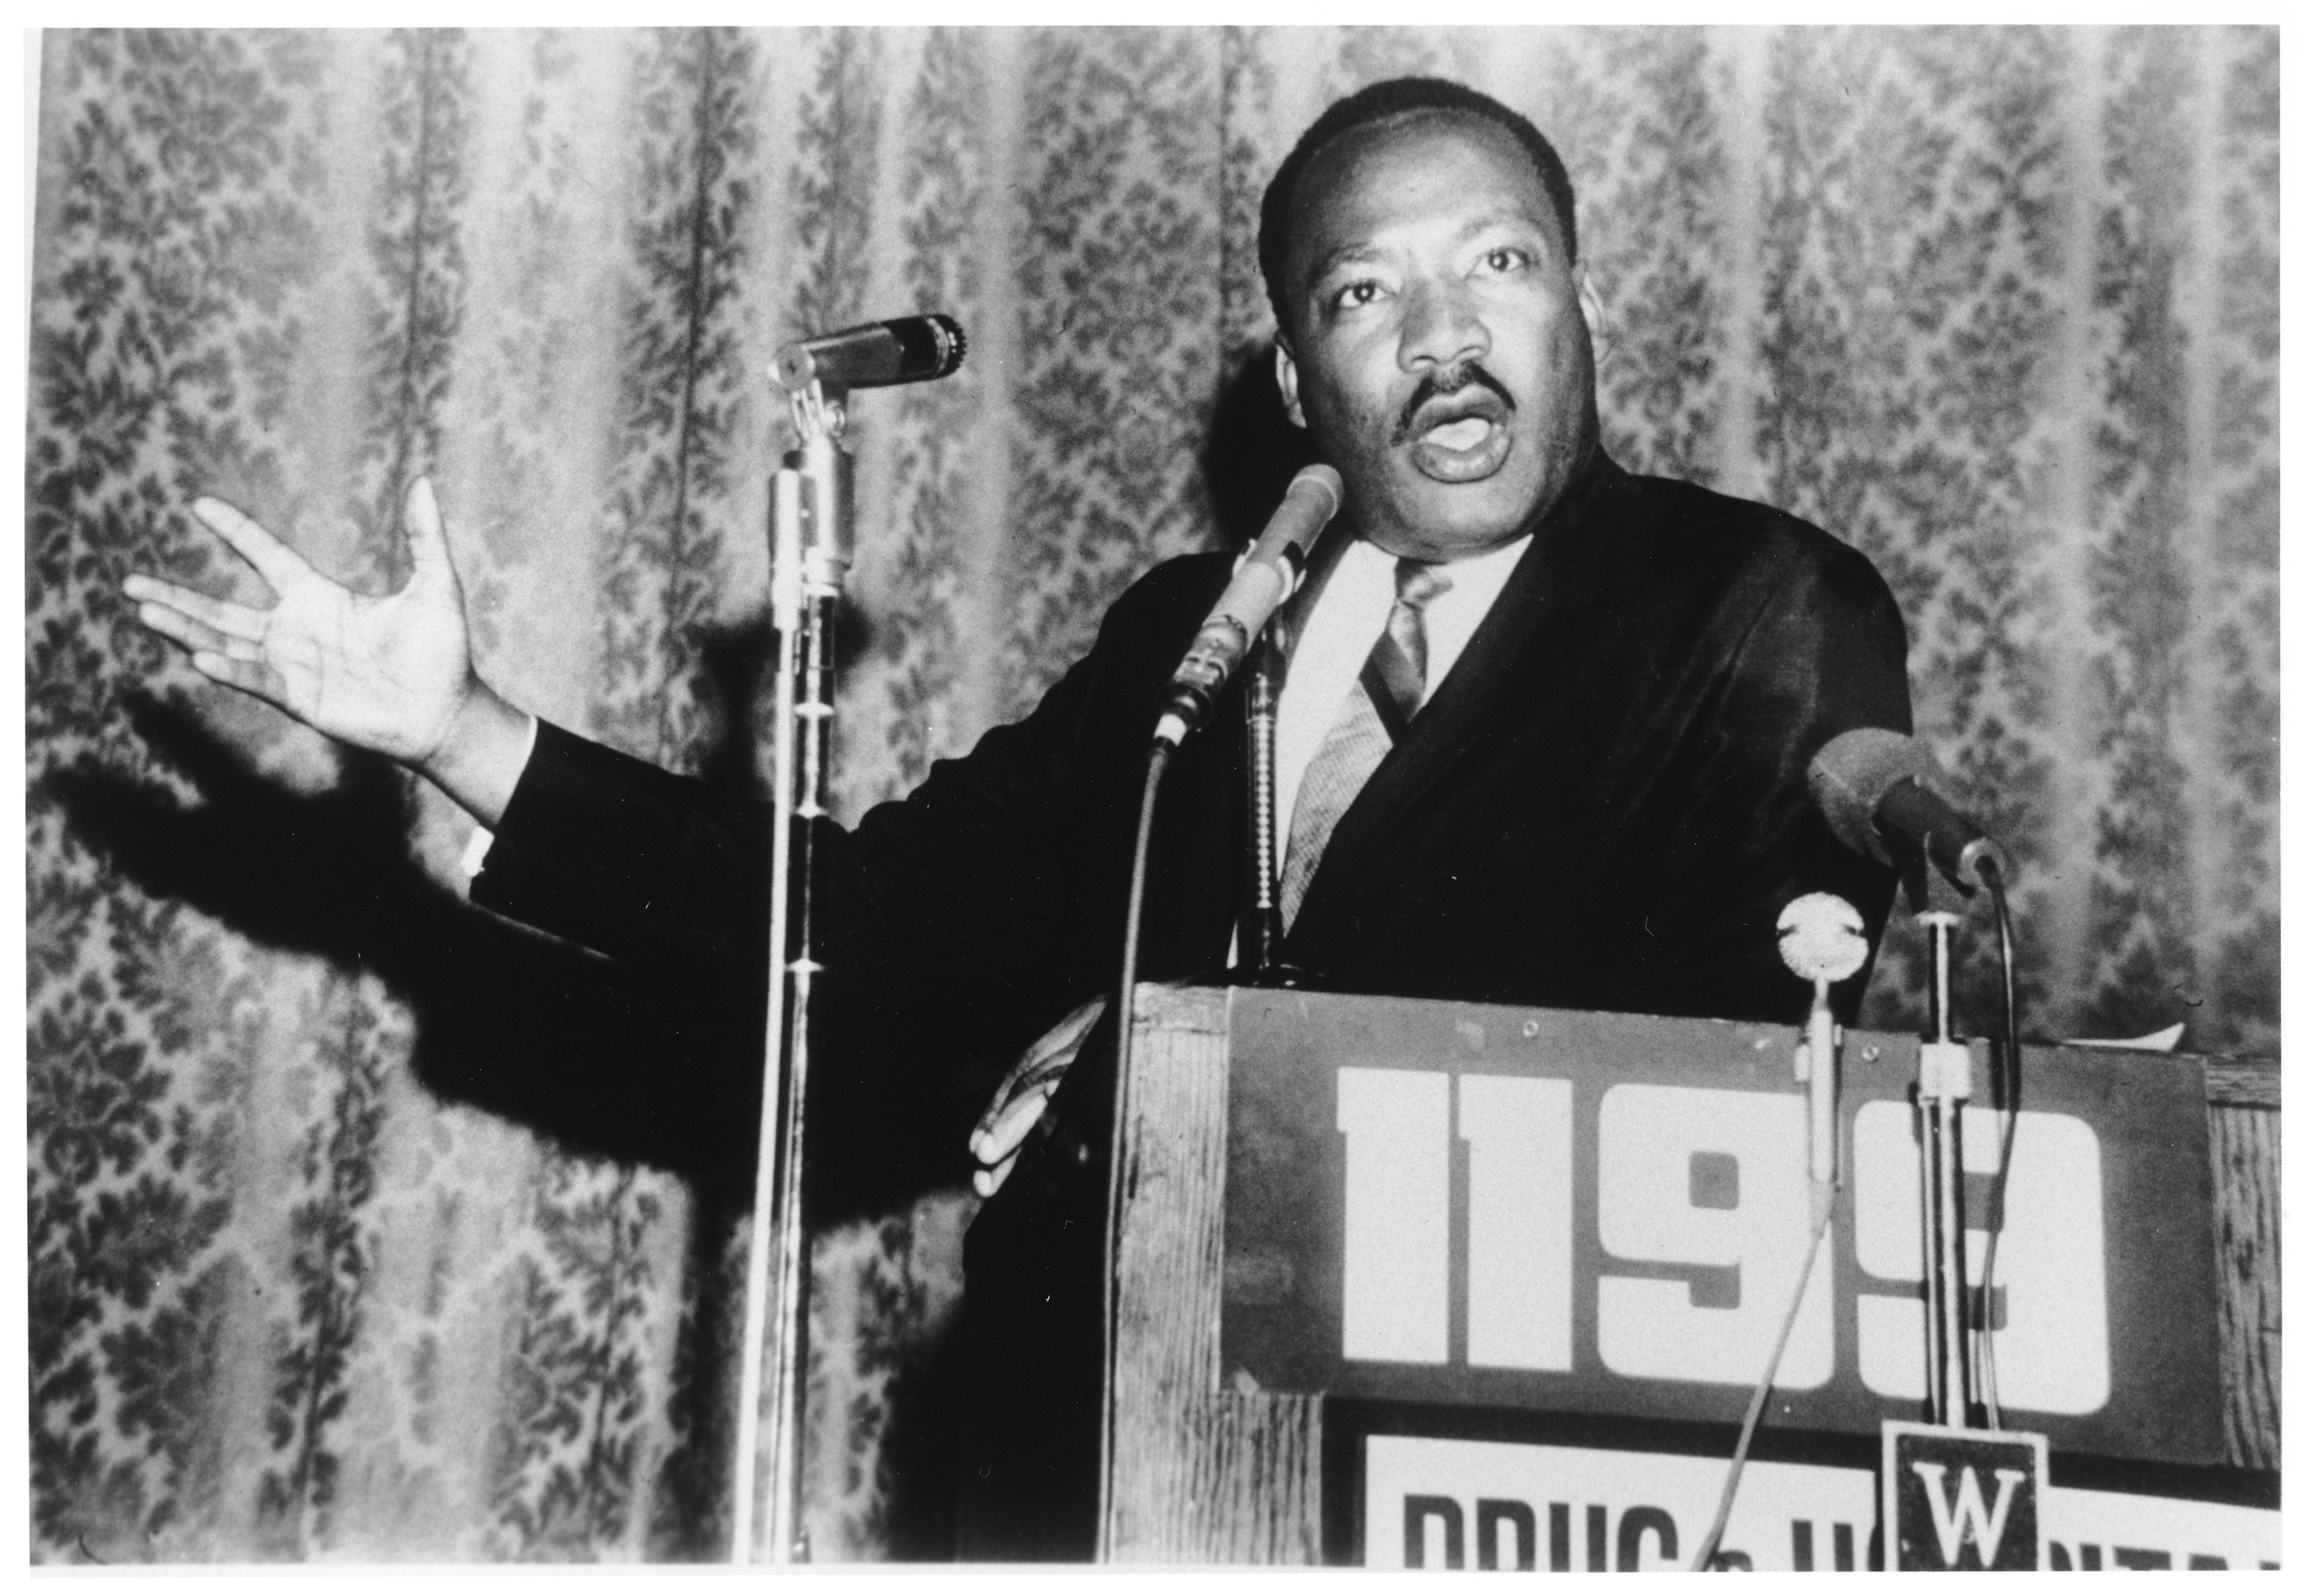 Dr. King addressing unionized healthcare workers on March 10, 1968.